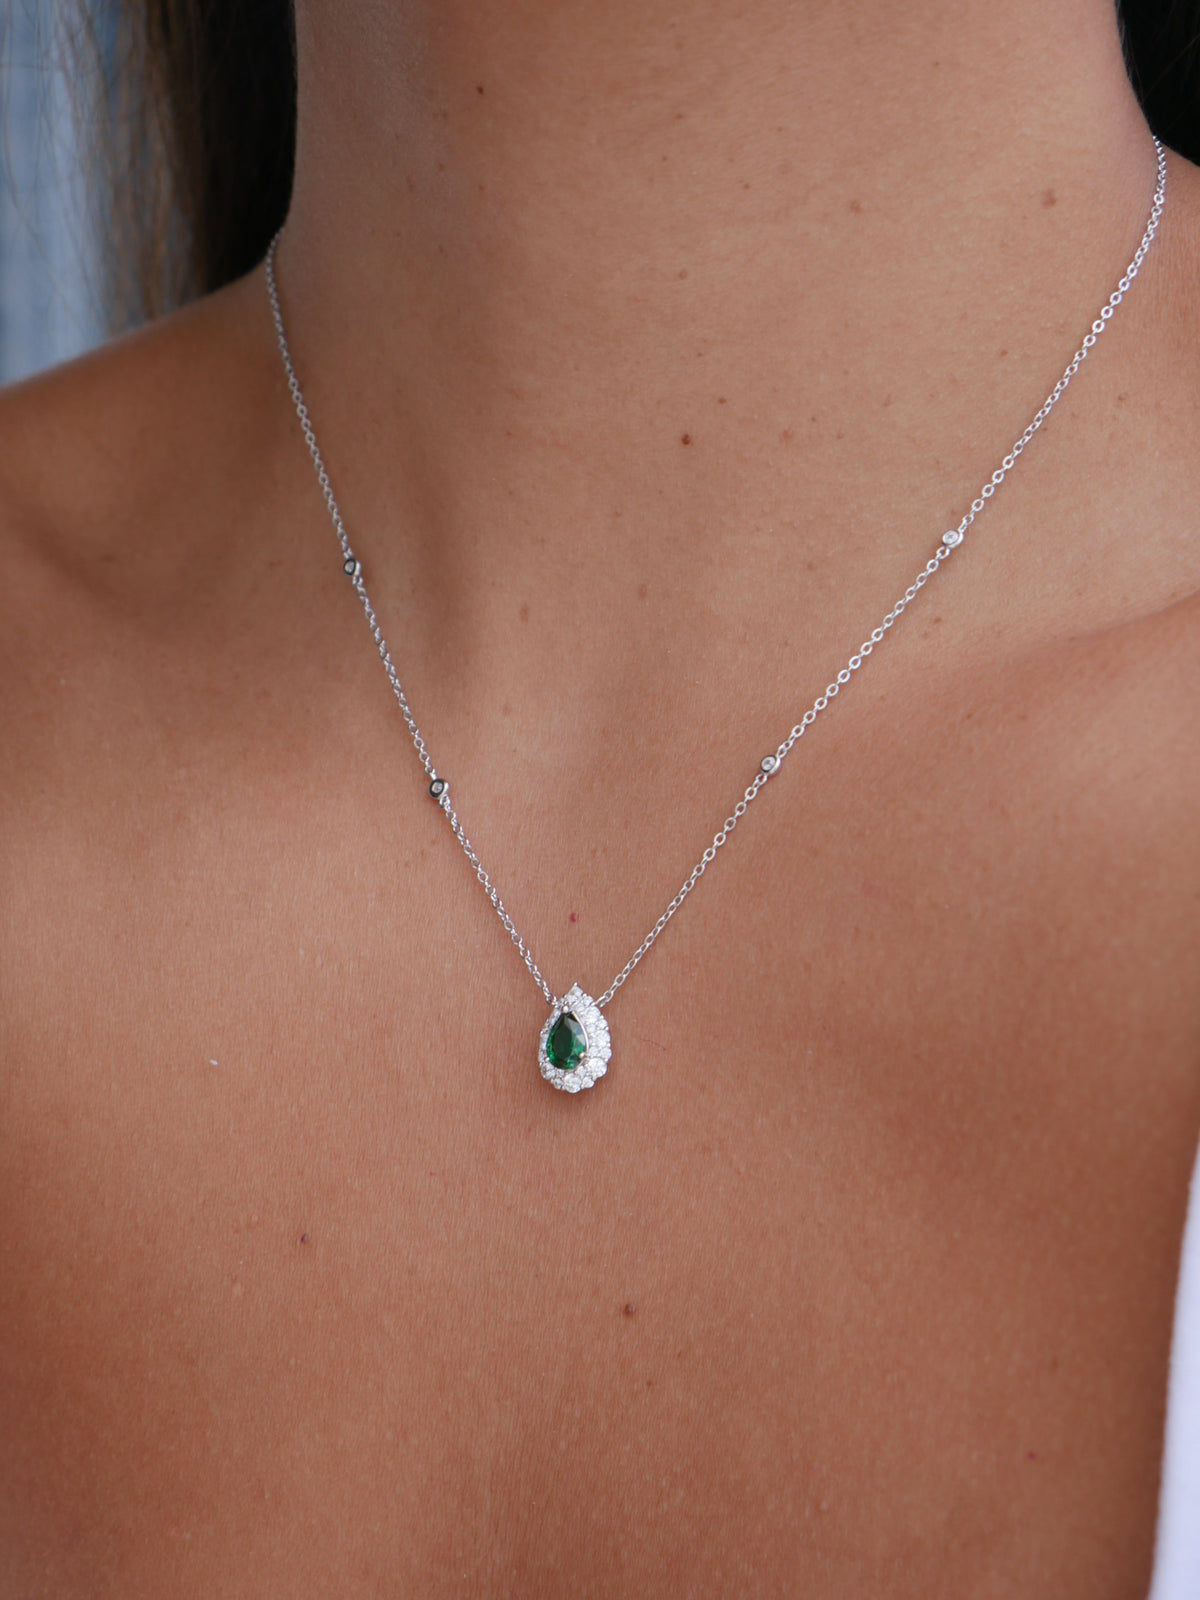 necklaces, silver necklace, emerald necklaces, white gold necklaces, pear shape necklaces, green rhinestone necklaces, rhinestone necklaces, fine jewelry, fashion jewelry, statement necklaces, dainty necklaces, gift ideas, christmas gifts, birthday gifts, anniversary gifts, trending jewelry on tiktok, affordable jewelry, nickel free jewelry, designer jewelry, jewelry for special occasions, dainty necklaces , tear shape necklaces